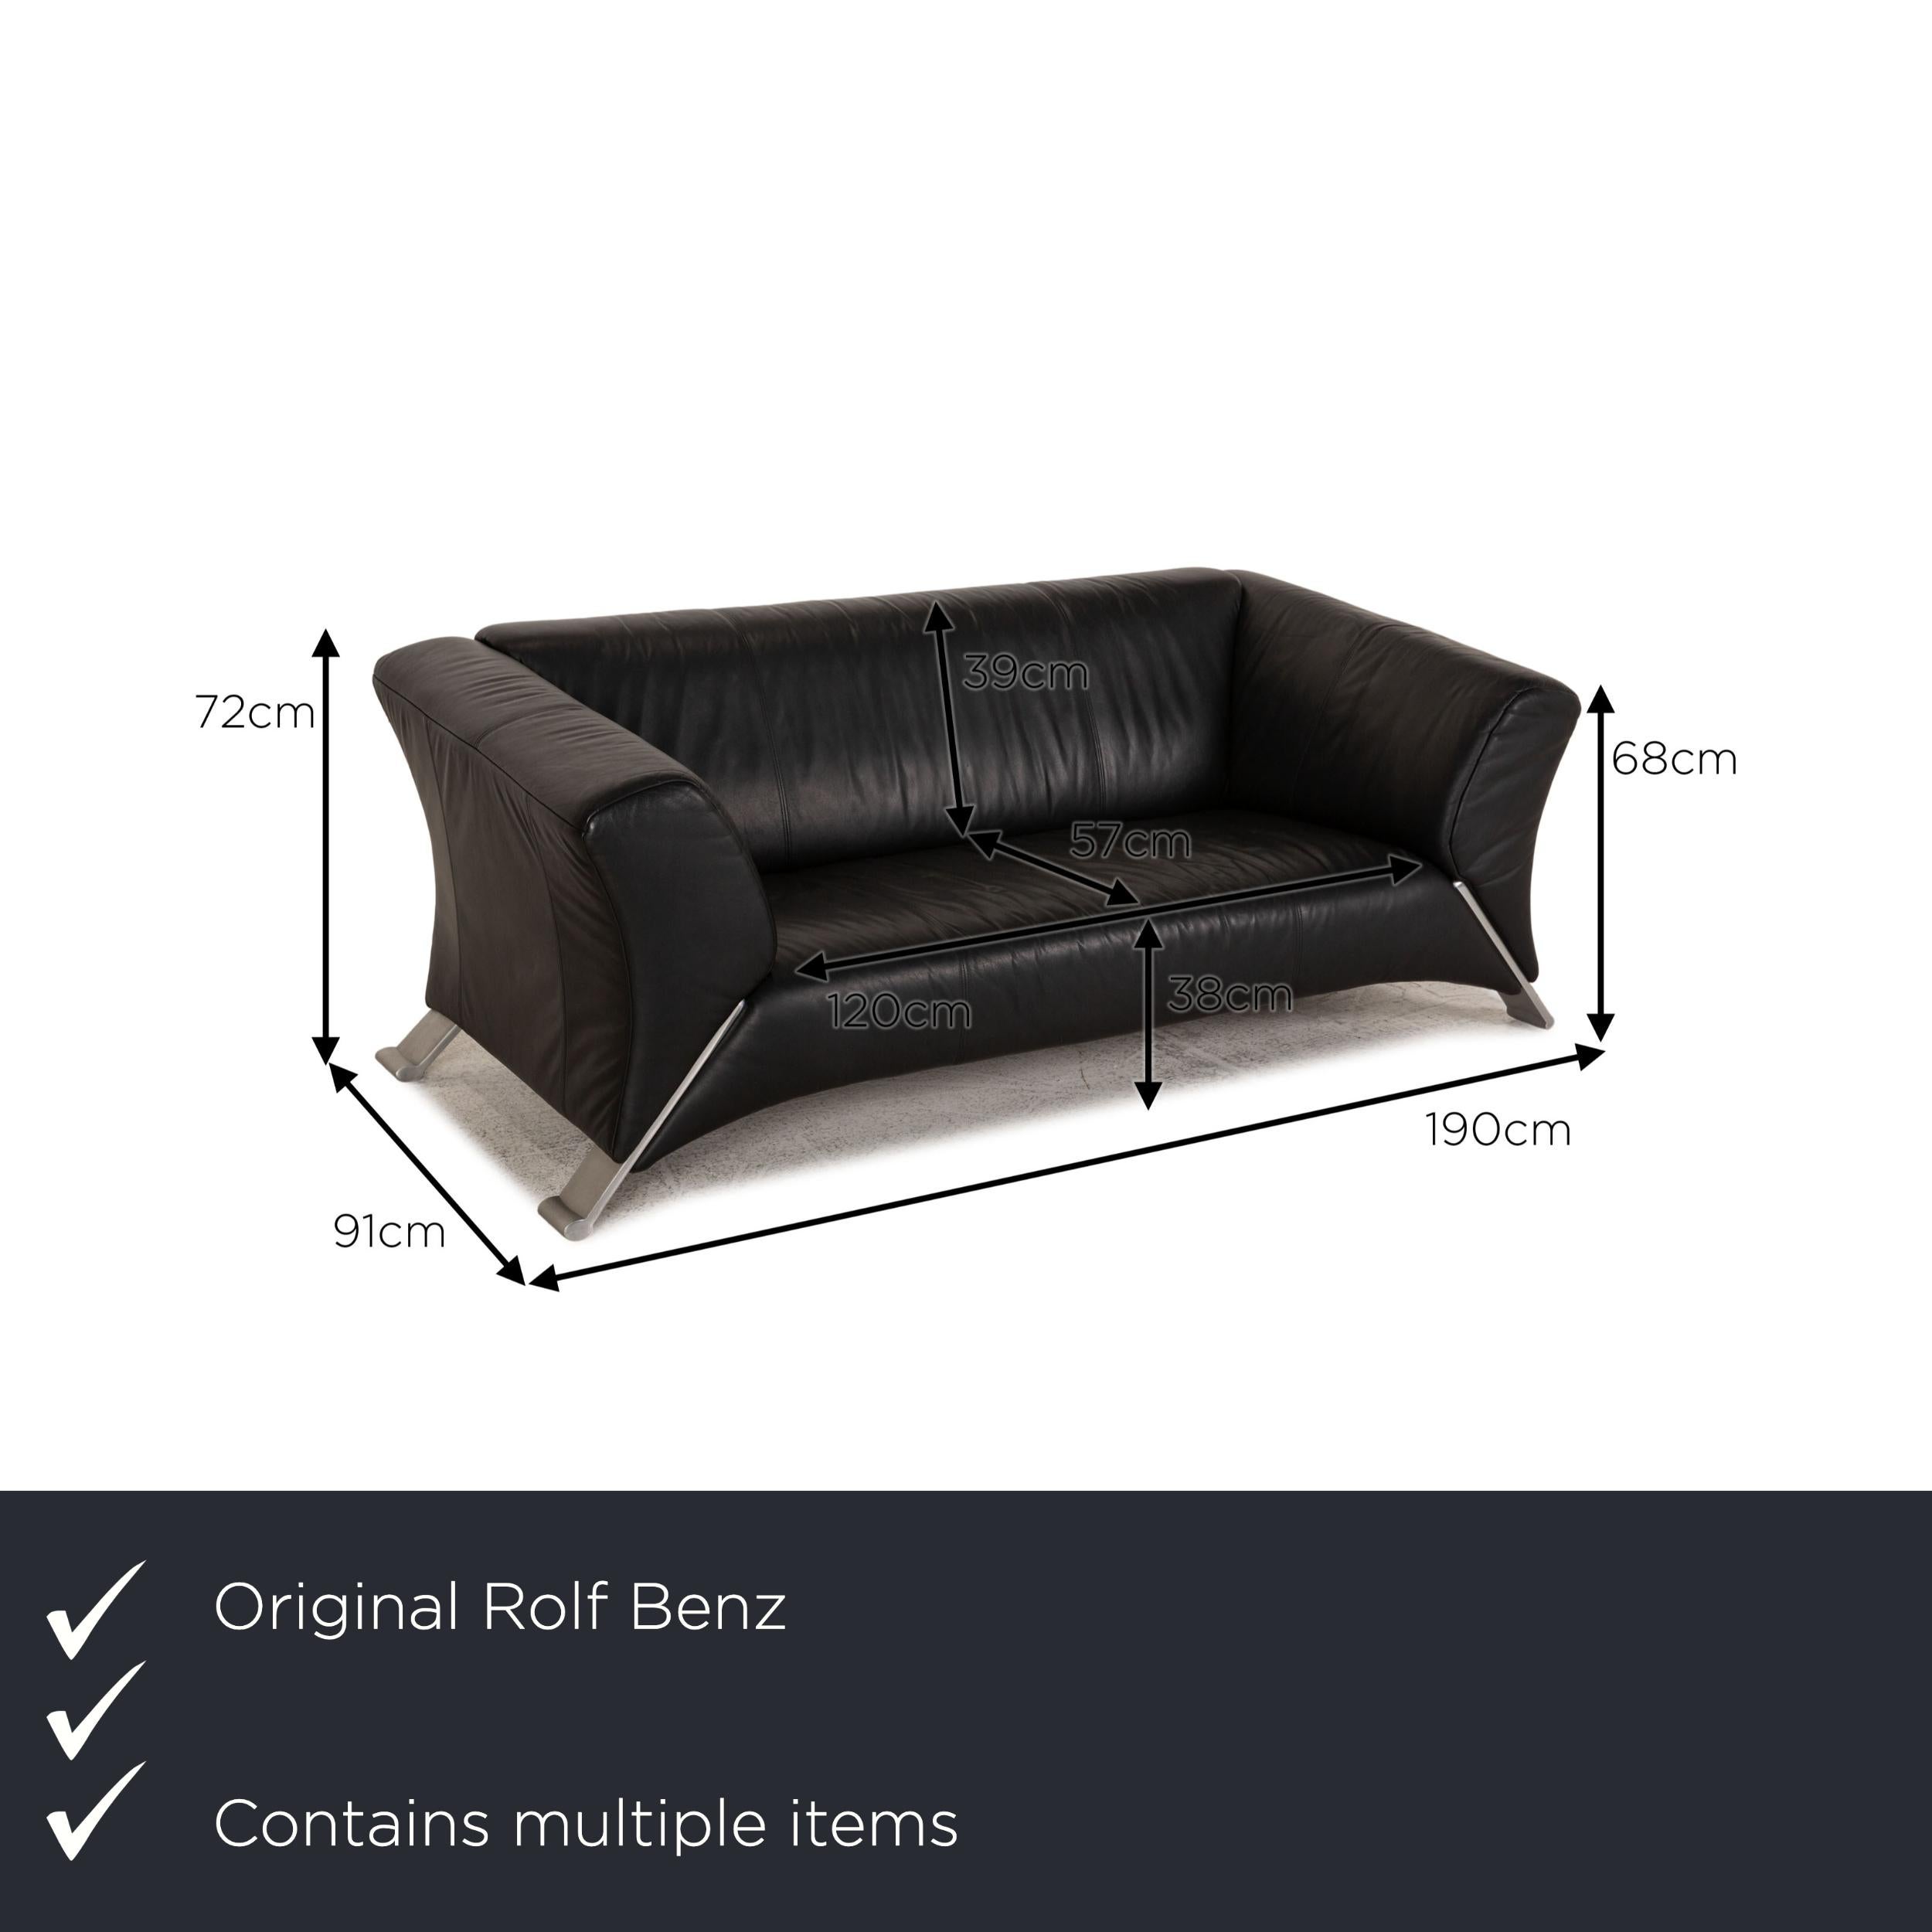 We present to you a Rolf Benz 322 leather sofa black 2x three-seater couch.

Product measurements in centimeters:

depth: 91
width: 190
height: 72
seat height: 38
rest height: 68
seat depth: 57
seat width: 120
back height: 39.

 